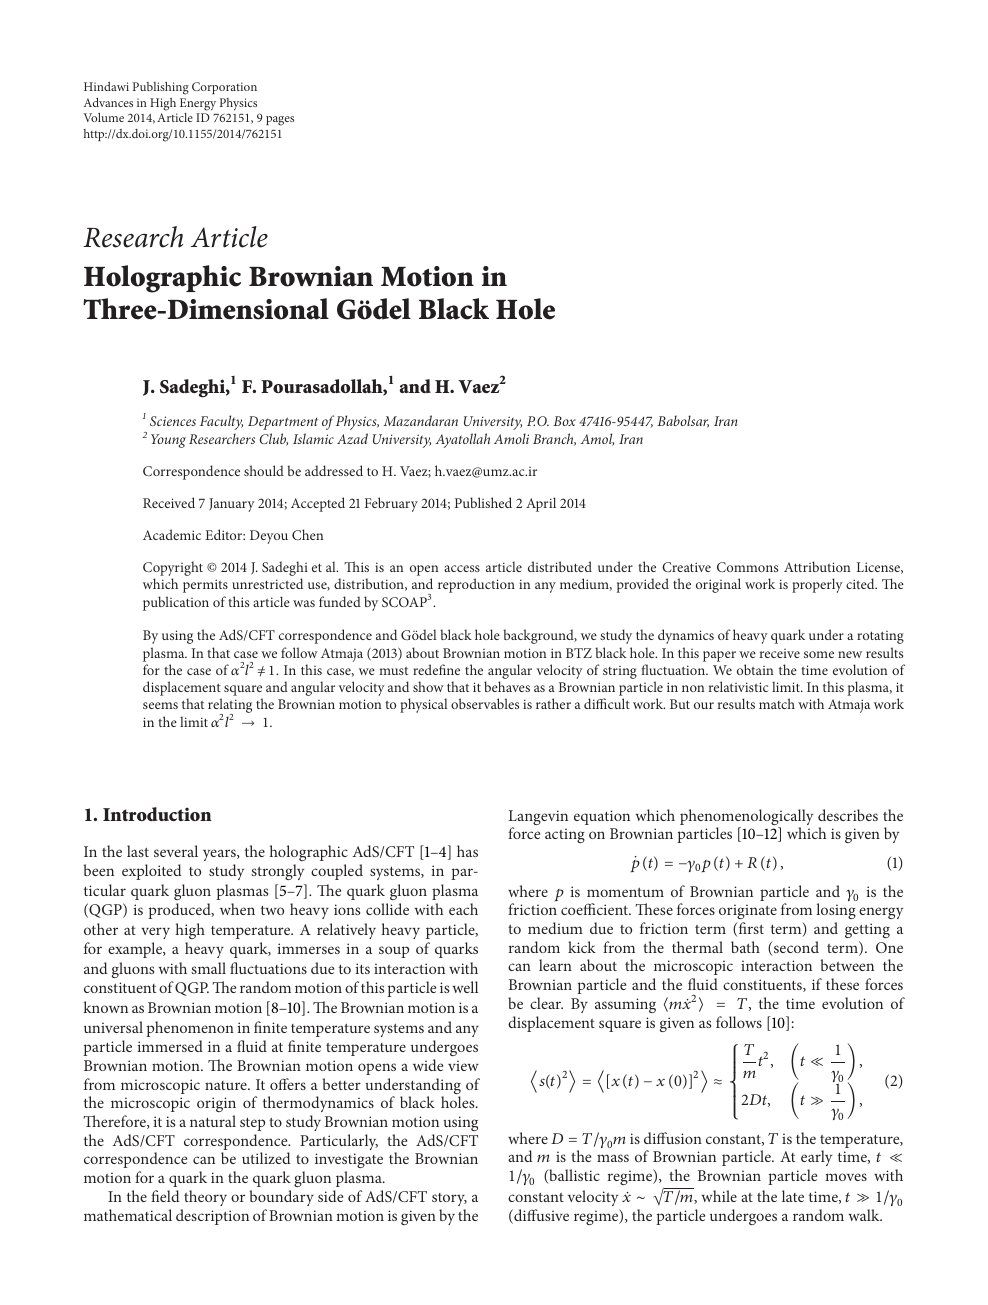 Holographic Brownian Motion In Three Dimensional Godel Black Hole Topic Of Research Paper In Physical Sciences Download Scholarly Article Pdf And Read For Free On Cyberleninka Open Science Hub